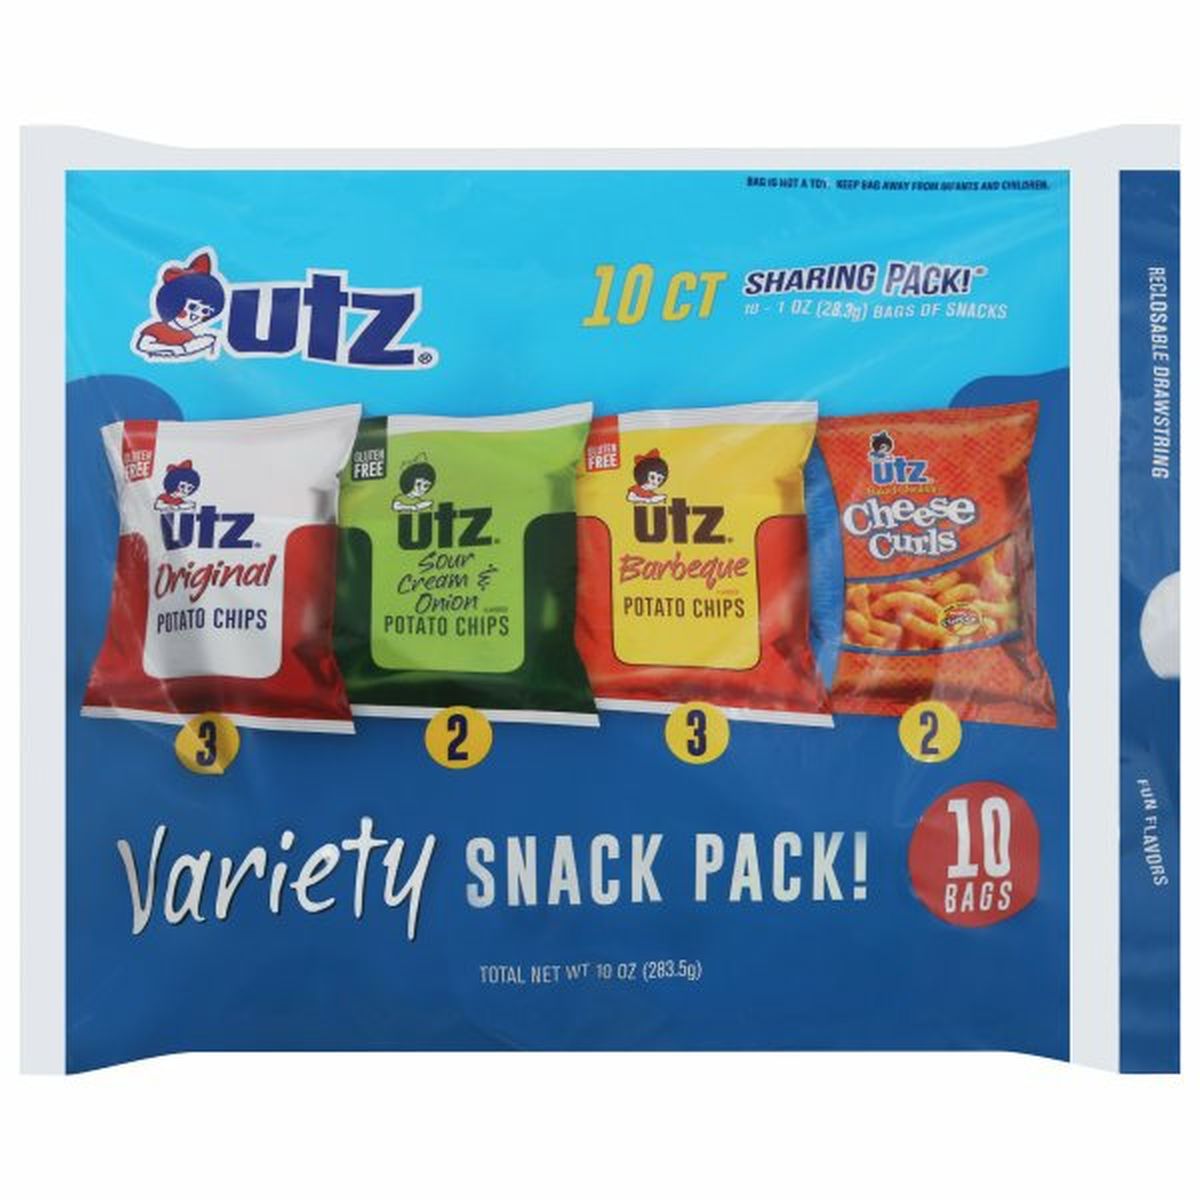 Calories in Utz Snack Pack, Variety, Sharing Pack